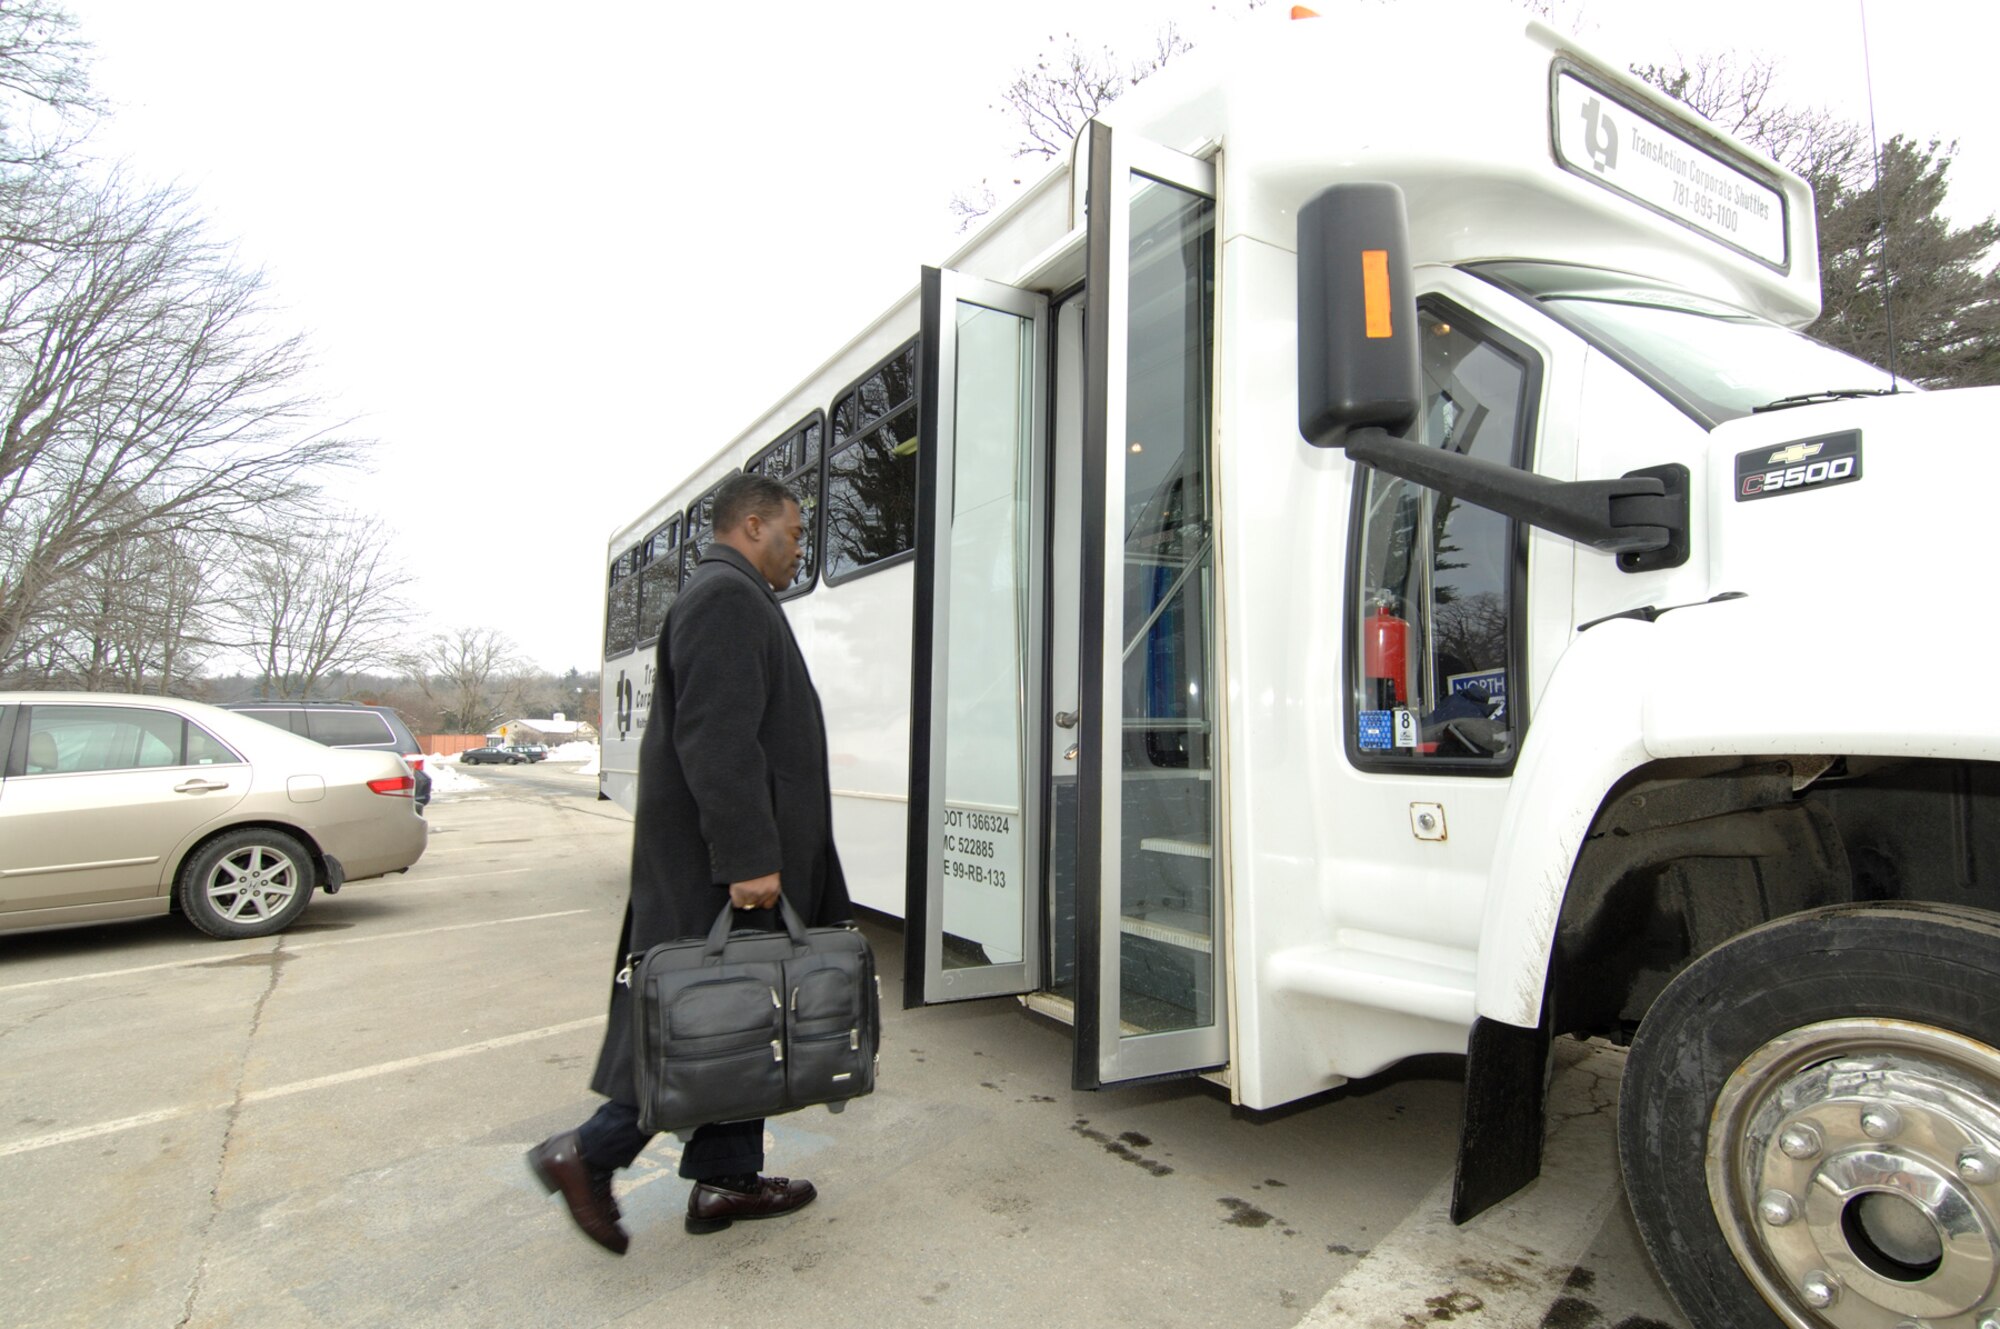 HANSCOM AIR FORCE BASE, Mass. – Galen Williams of the 554th Electronic Systems Wing, boards the new corporate shuttle outside of Building 1600 on Jan. 23. 

TransAction Associates Corporate shuttle is now operating a service Monday to Friday between Nashua and the base. The Shuttle Service pick up, drop off location is the Park and Ride facility at exit 5W off of Route 3 on Route 111. 

Shuttles depart Nashua at 6 a.m. and 7:45 a.m. with arrivals at Hanscom at approximately 6:45 a.m. and 8:30 a.m., respectively. Riders are dropped off and picked up at a location convenient to their work site. Afternoon return shuttles are currently at 4 p.m. and 5:45 p.m. but these schedules can be modified based on actual rider preference. 

The shuttle is available to all Hanscom commuters. To learn more contact Ed Weiner of Transaction Associates at 781-895-1100. (U.S. Air Force photo by Rick Berry)
